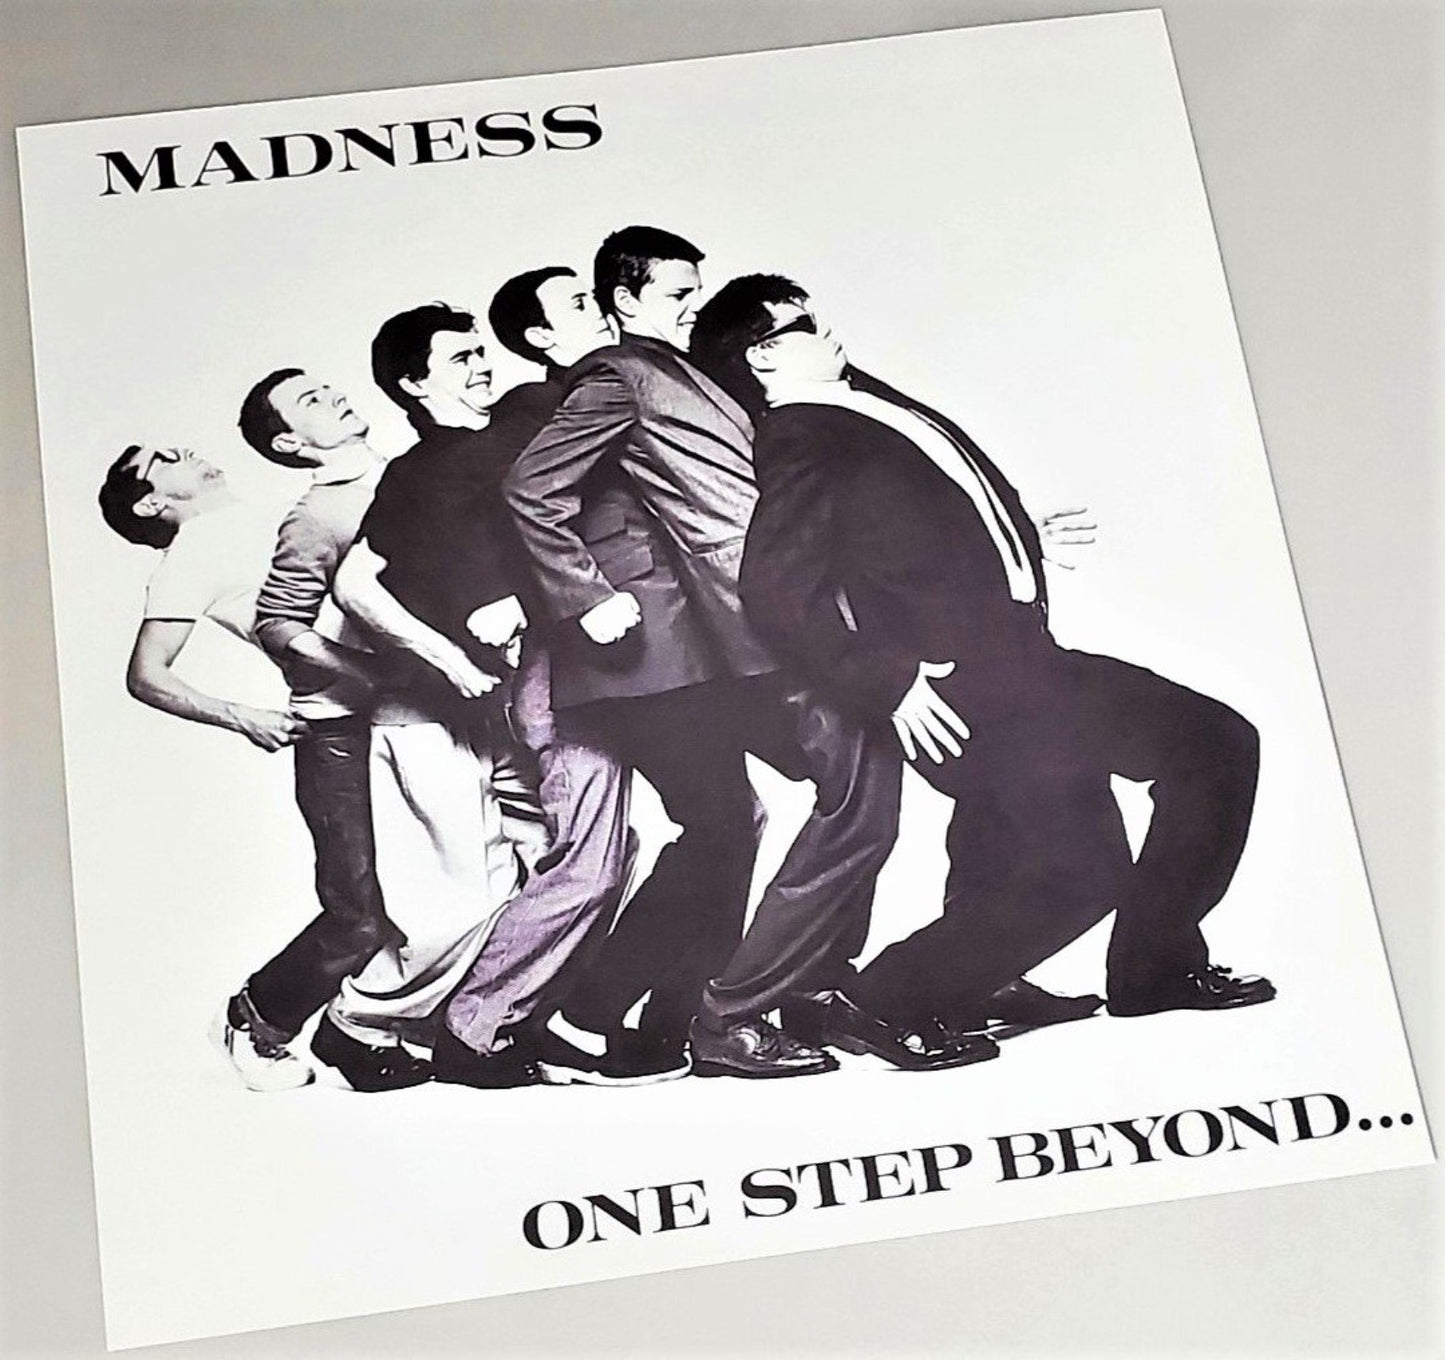 Madness 1979 One Step Beyond album cover art page featured in Rock Covers 2014 coffee table book